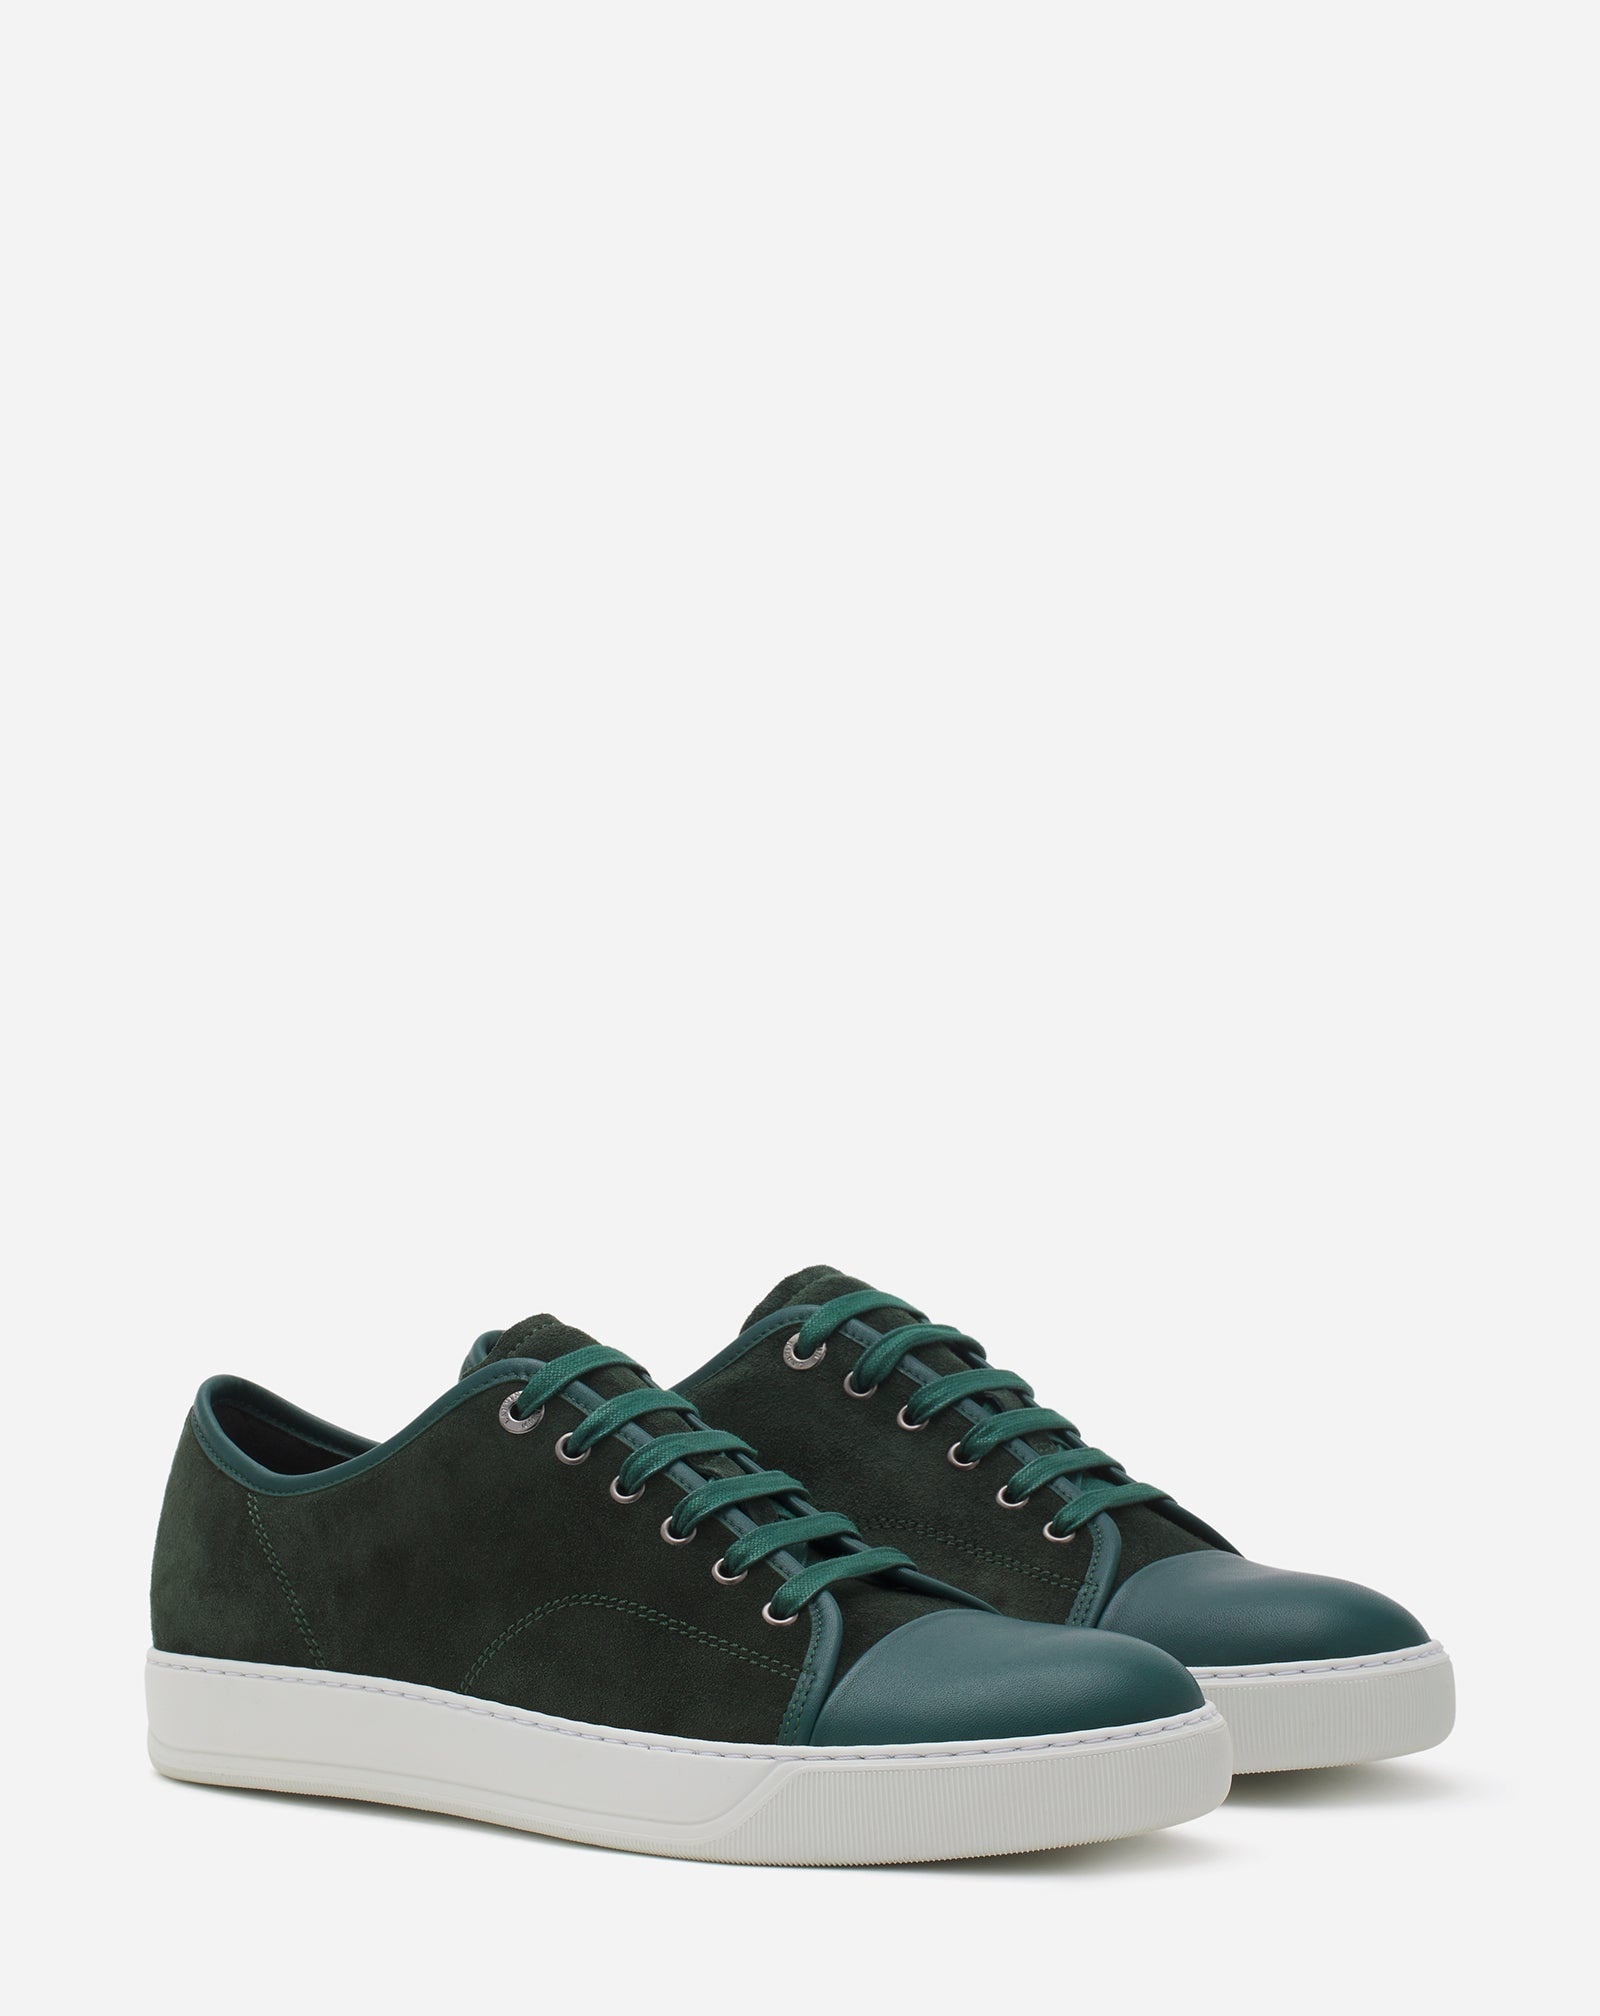 DBB1 LEATHER AND SUEDE SNEAKERS - 2